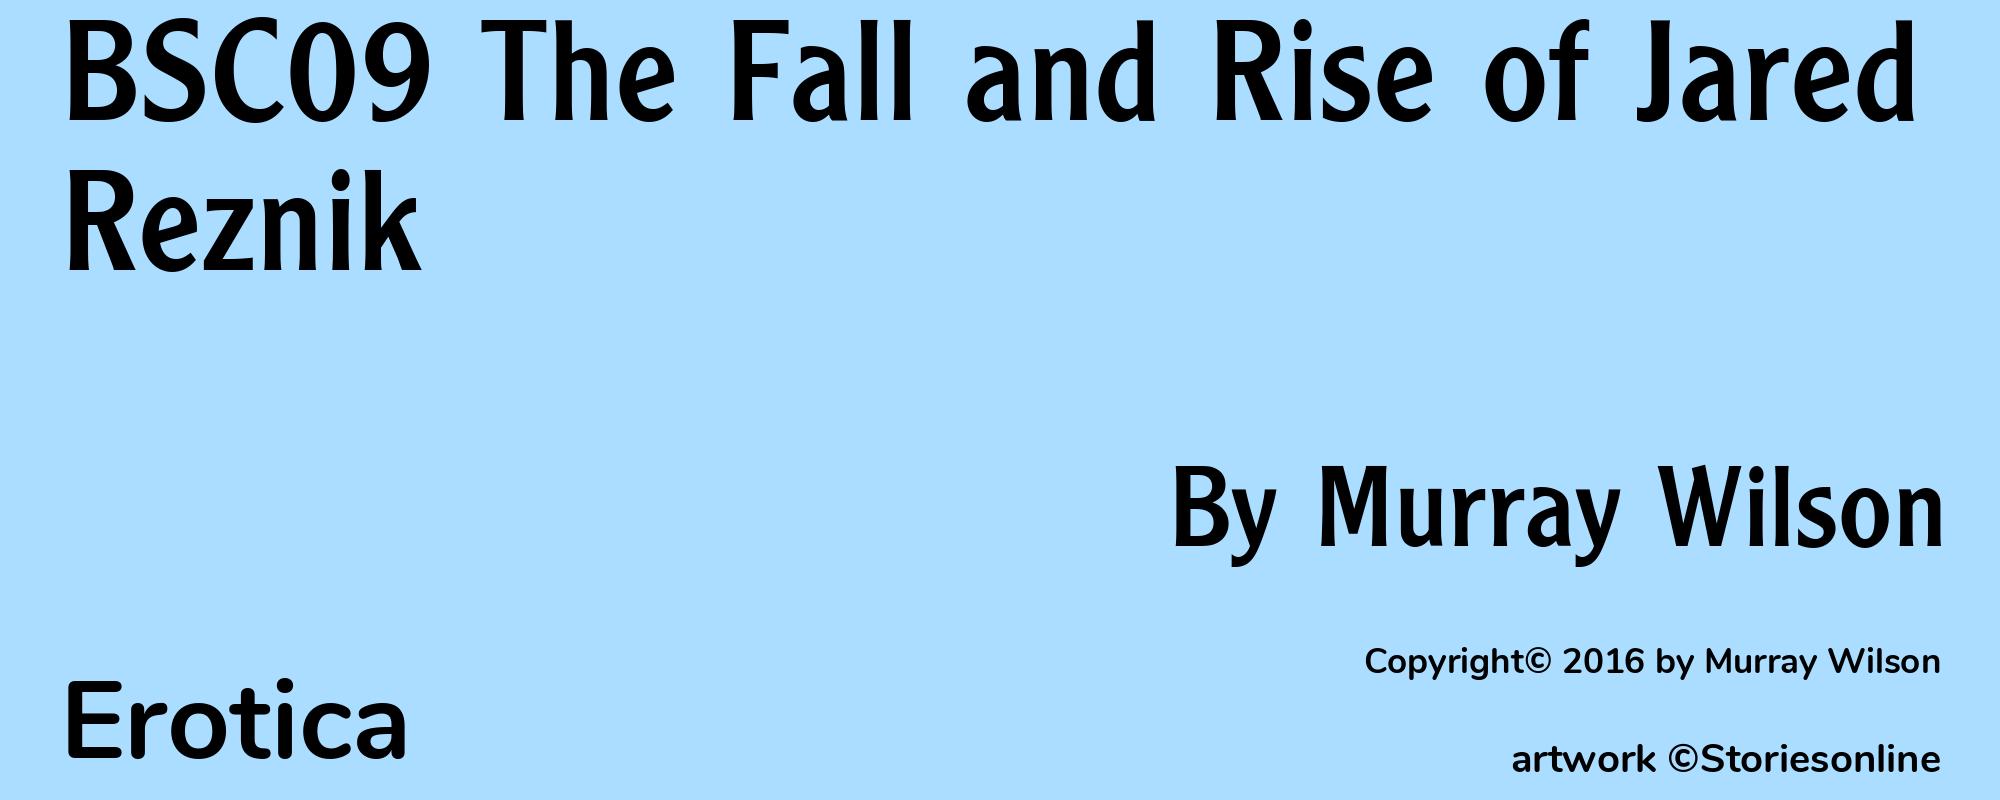 BSC09 The Fall and Rise of Jared Reznik - Cover